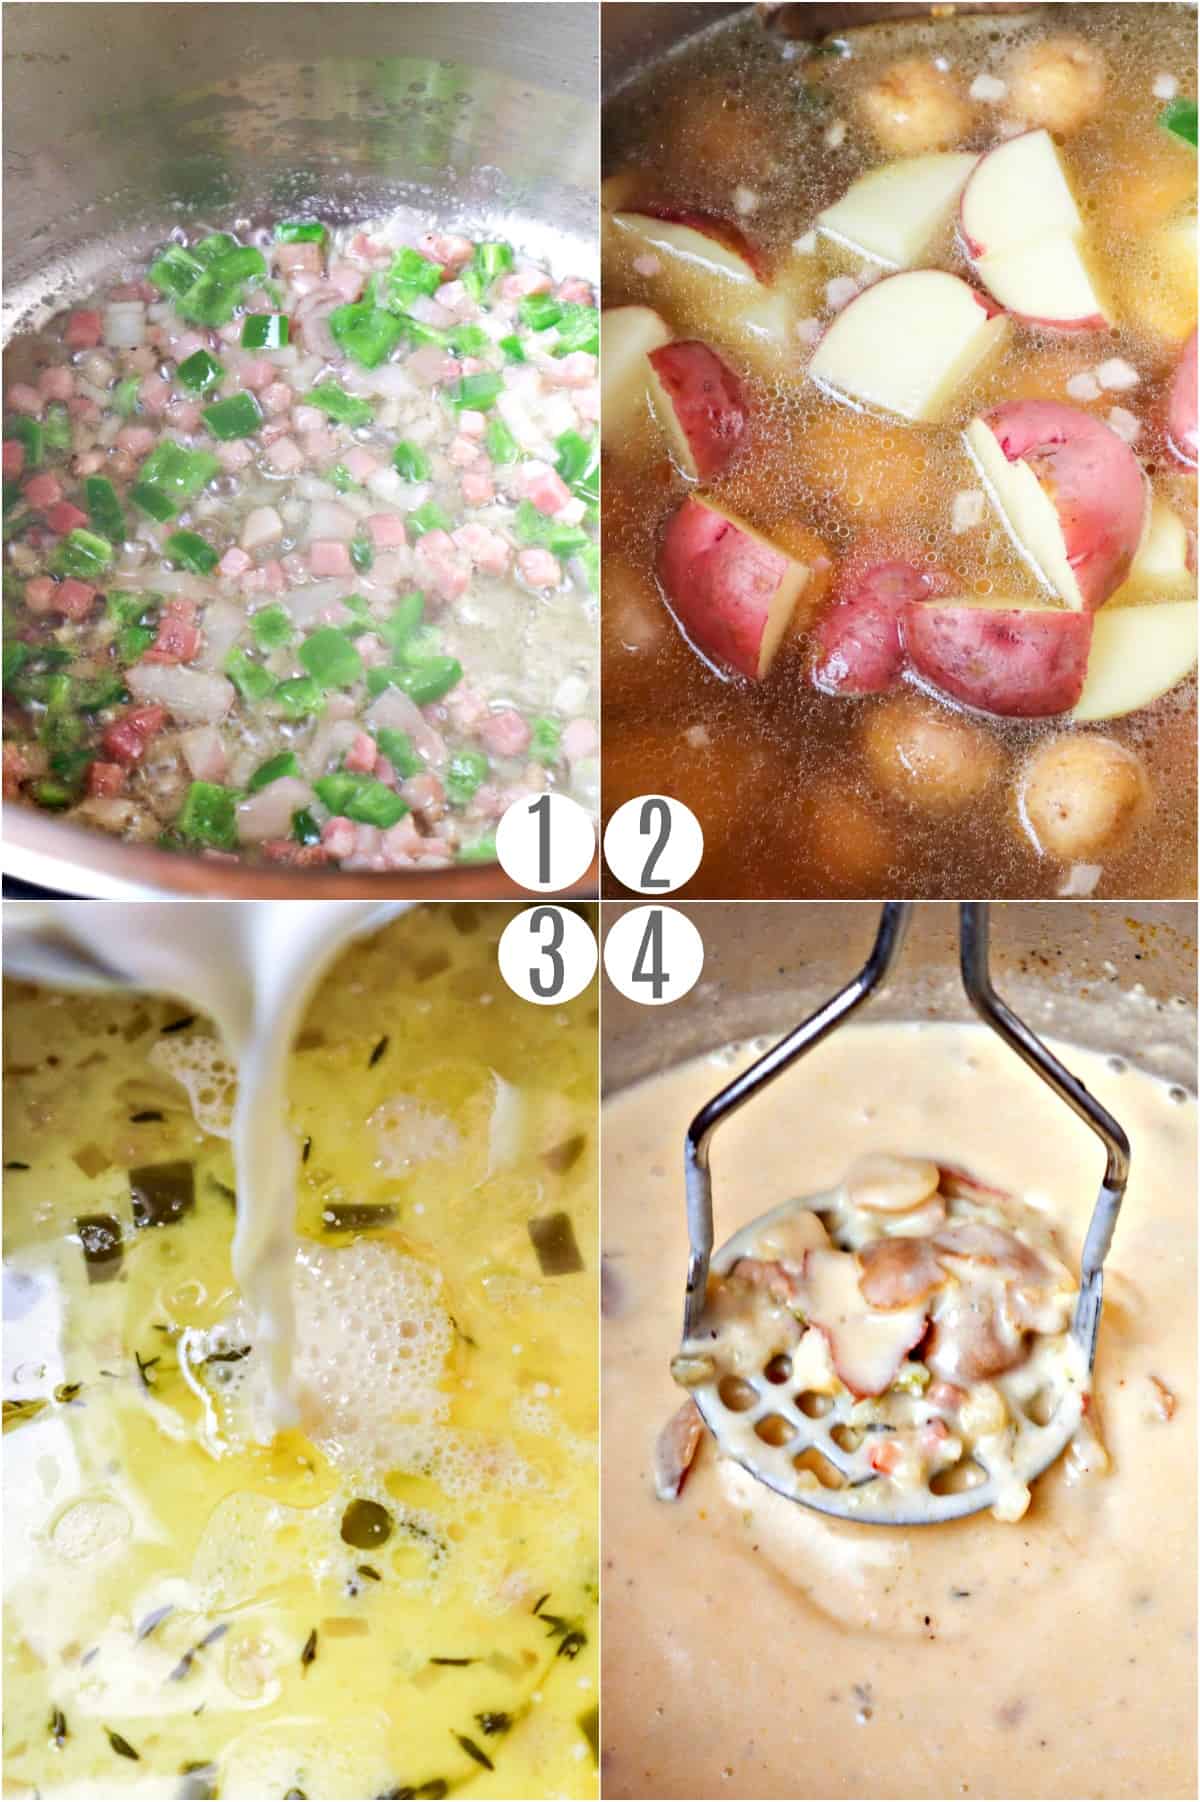 Step by step photos showing how to make potato soup in the pressure cooker.